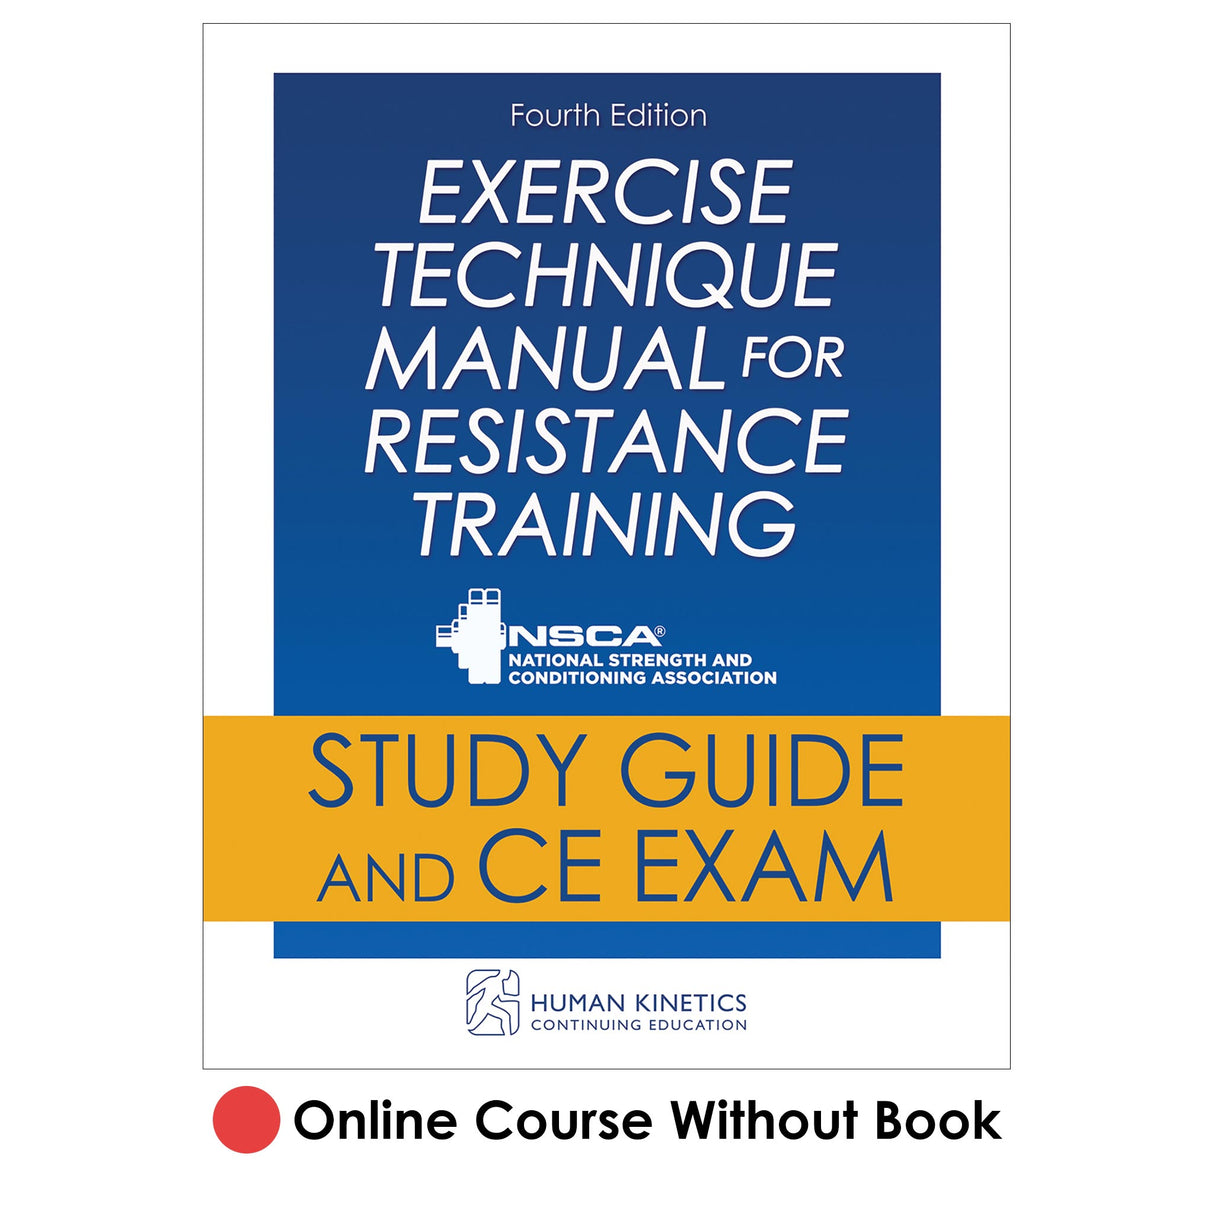 Exercise Technique Manual for Resistance Training 4th Edition Online CE Course Without Book